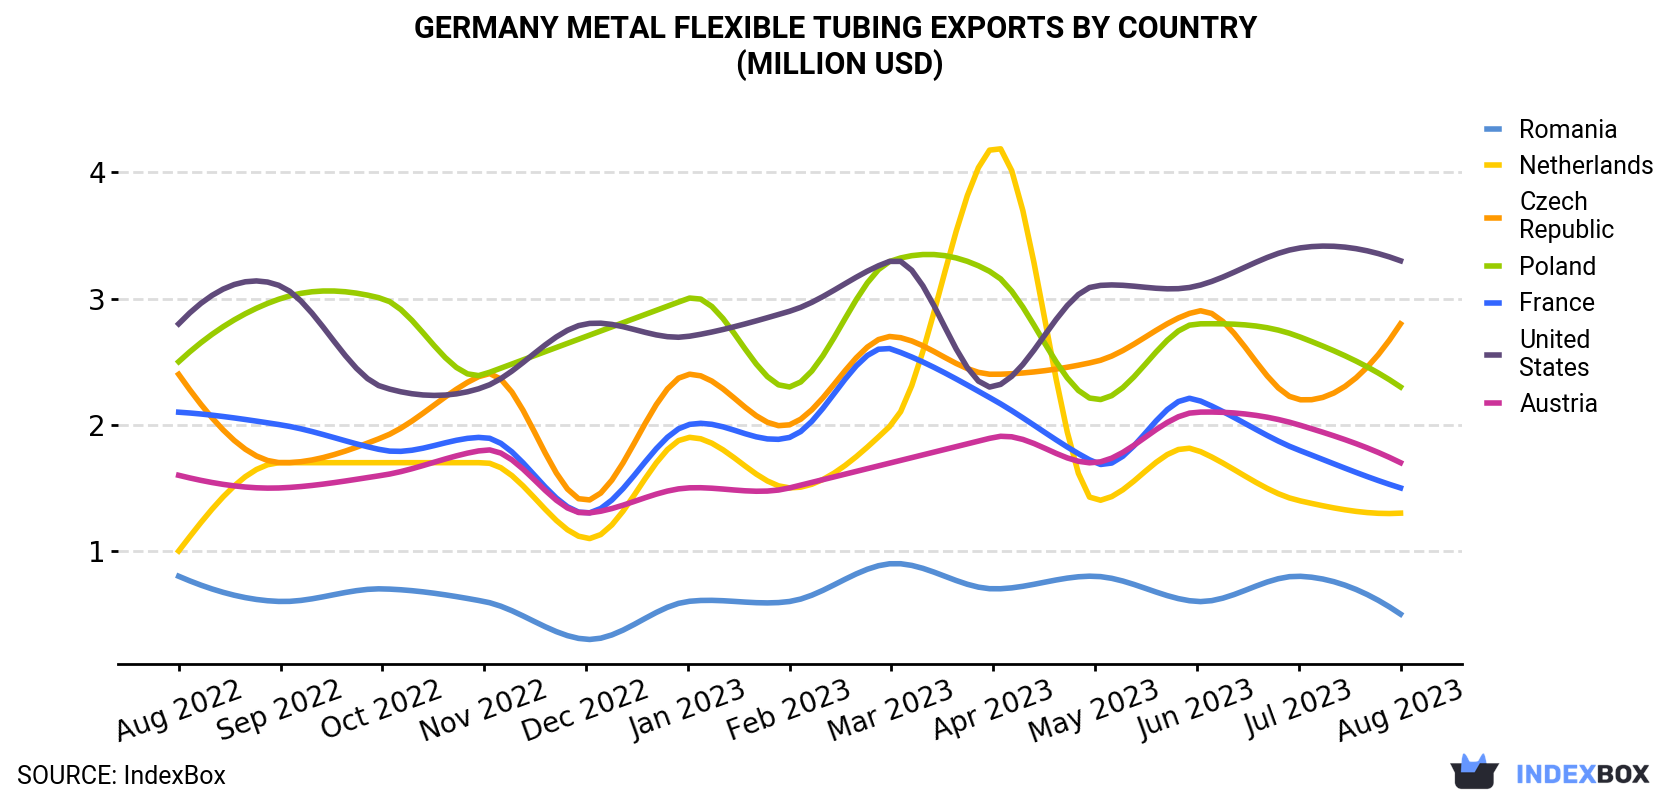 August 2023 Sees a Significant Drop in Germany's Metal Flexible Tubing ...